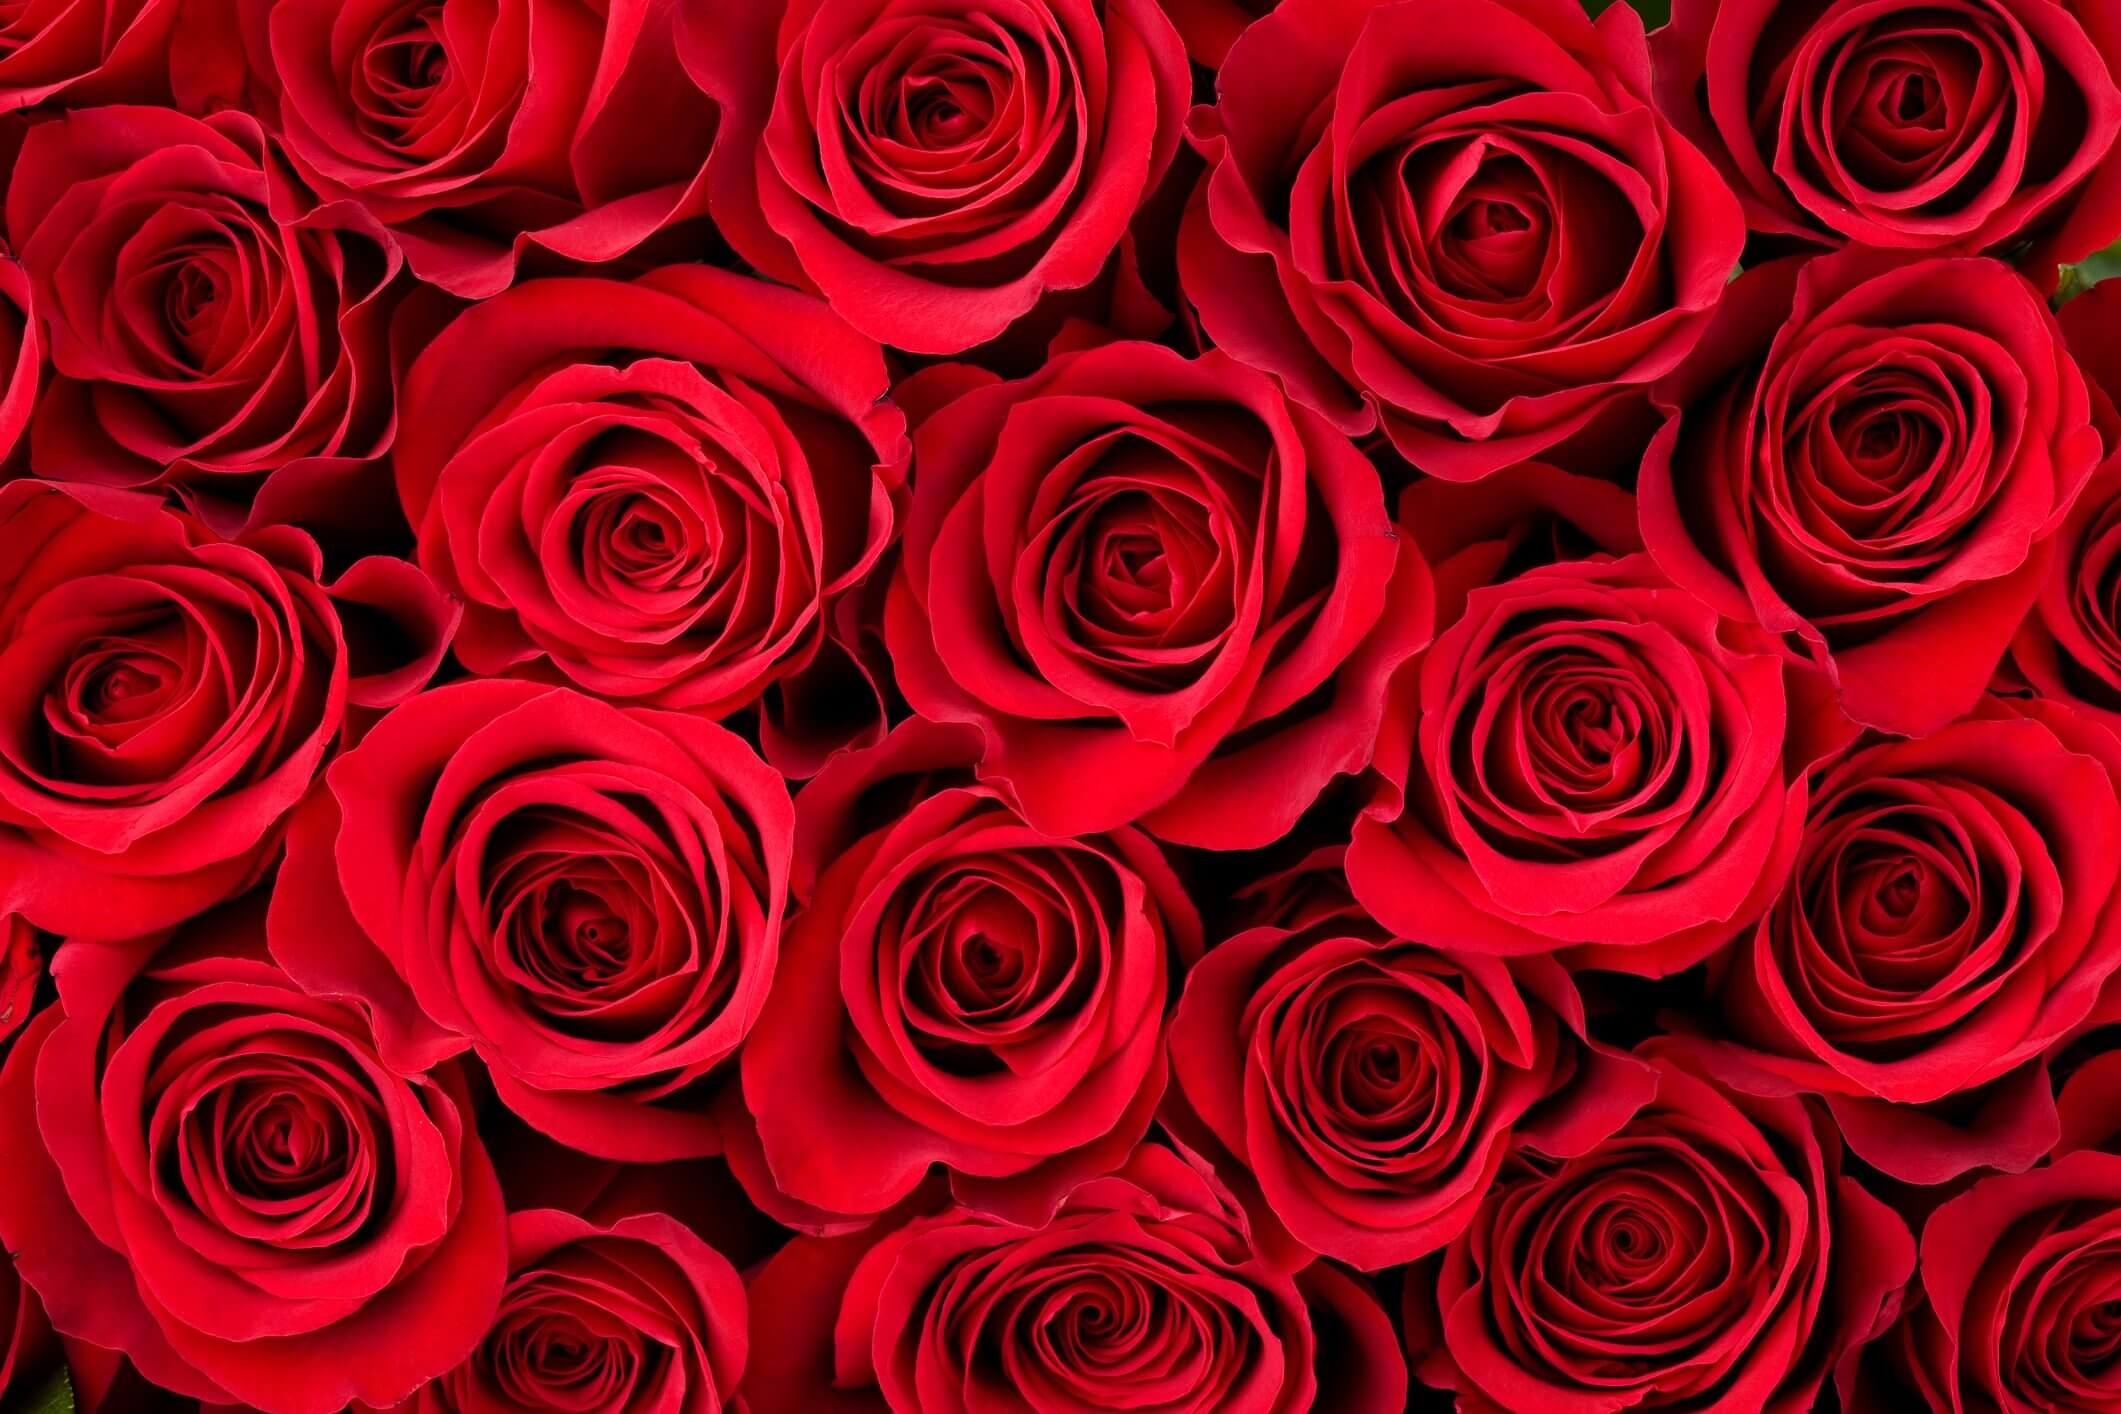 Happy Valentines Day Rose Images